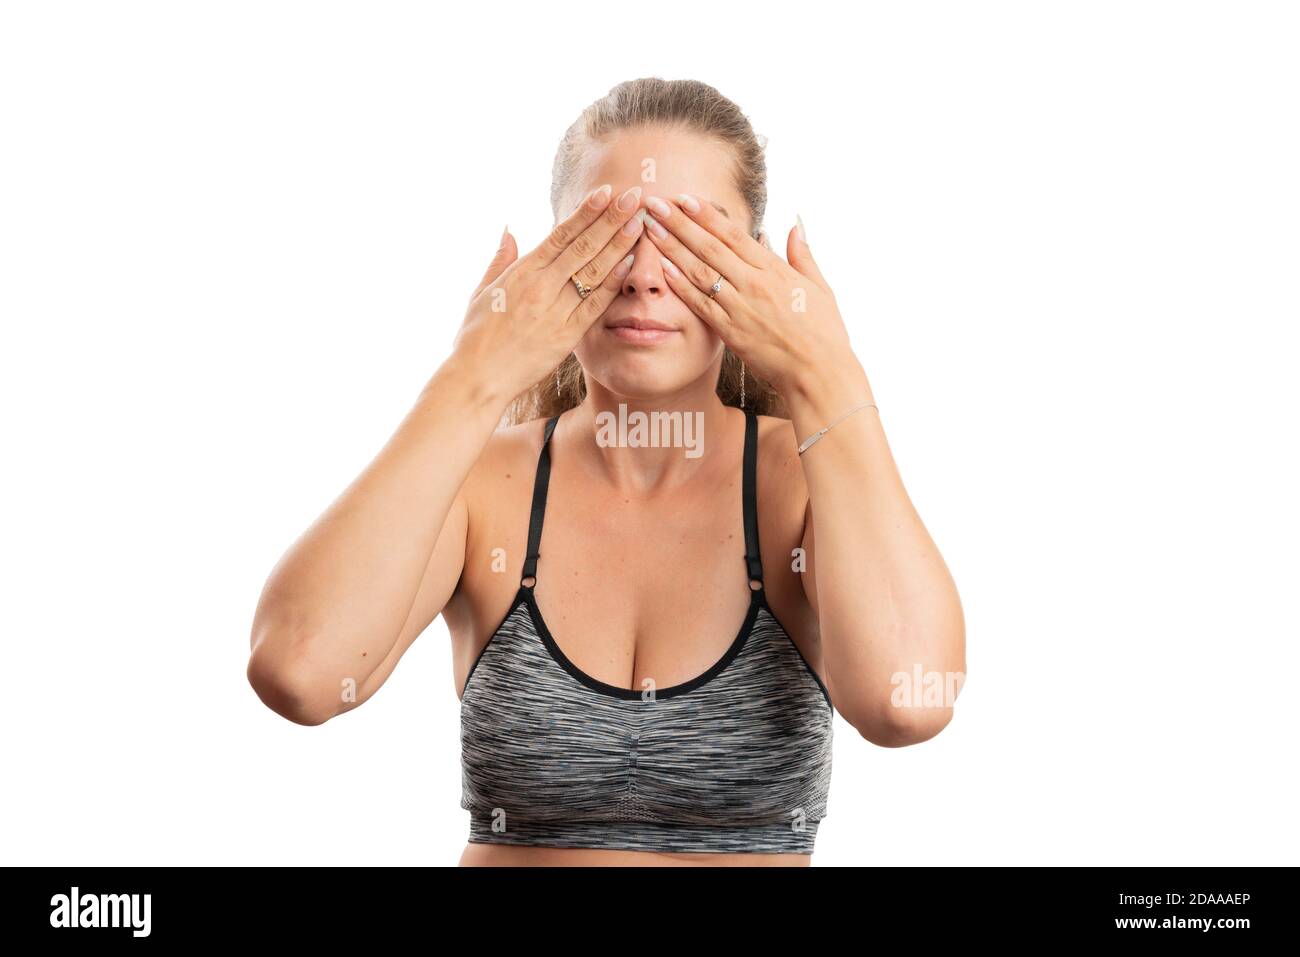 Adult model woman wearing gym training workout attire covering eyes using hands as secret concept active lifestyle isolated on white studio background Stock Photo